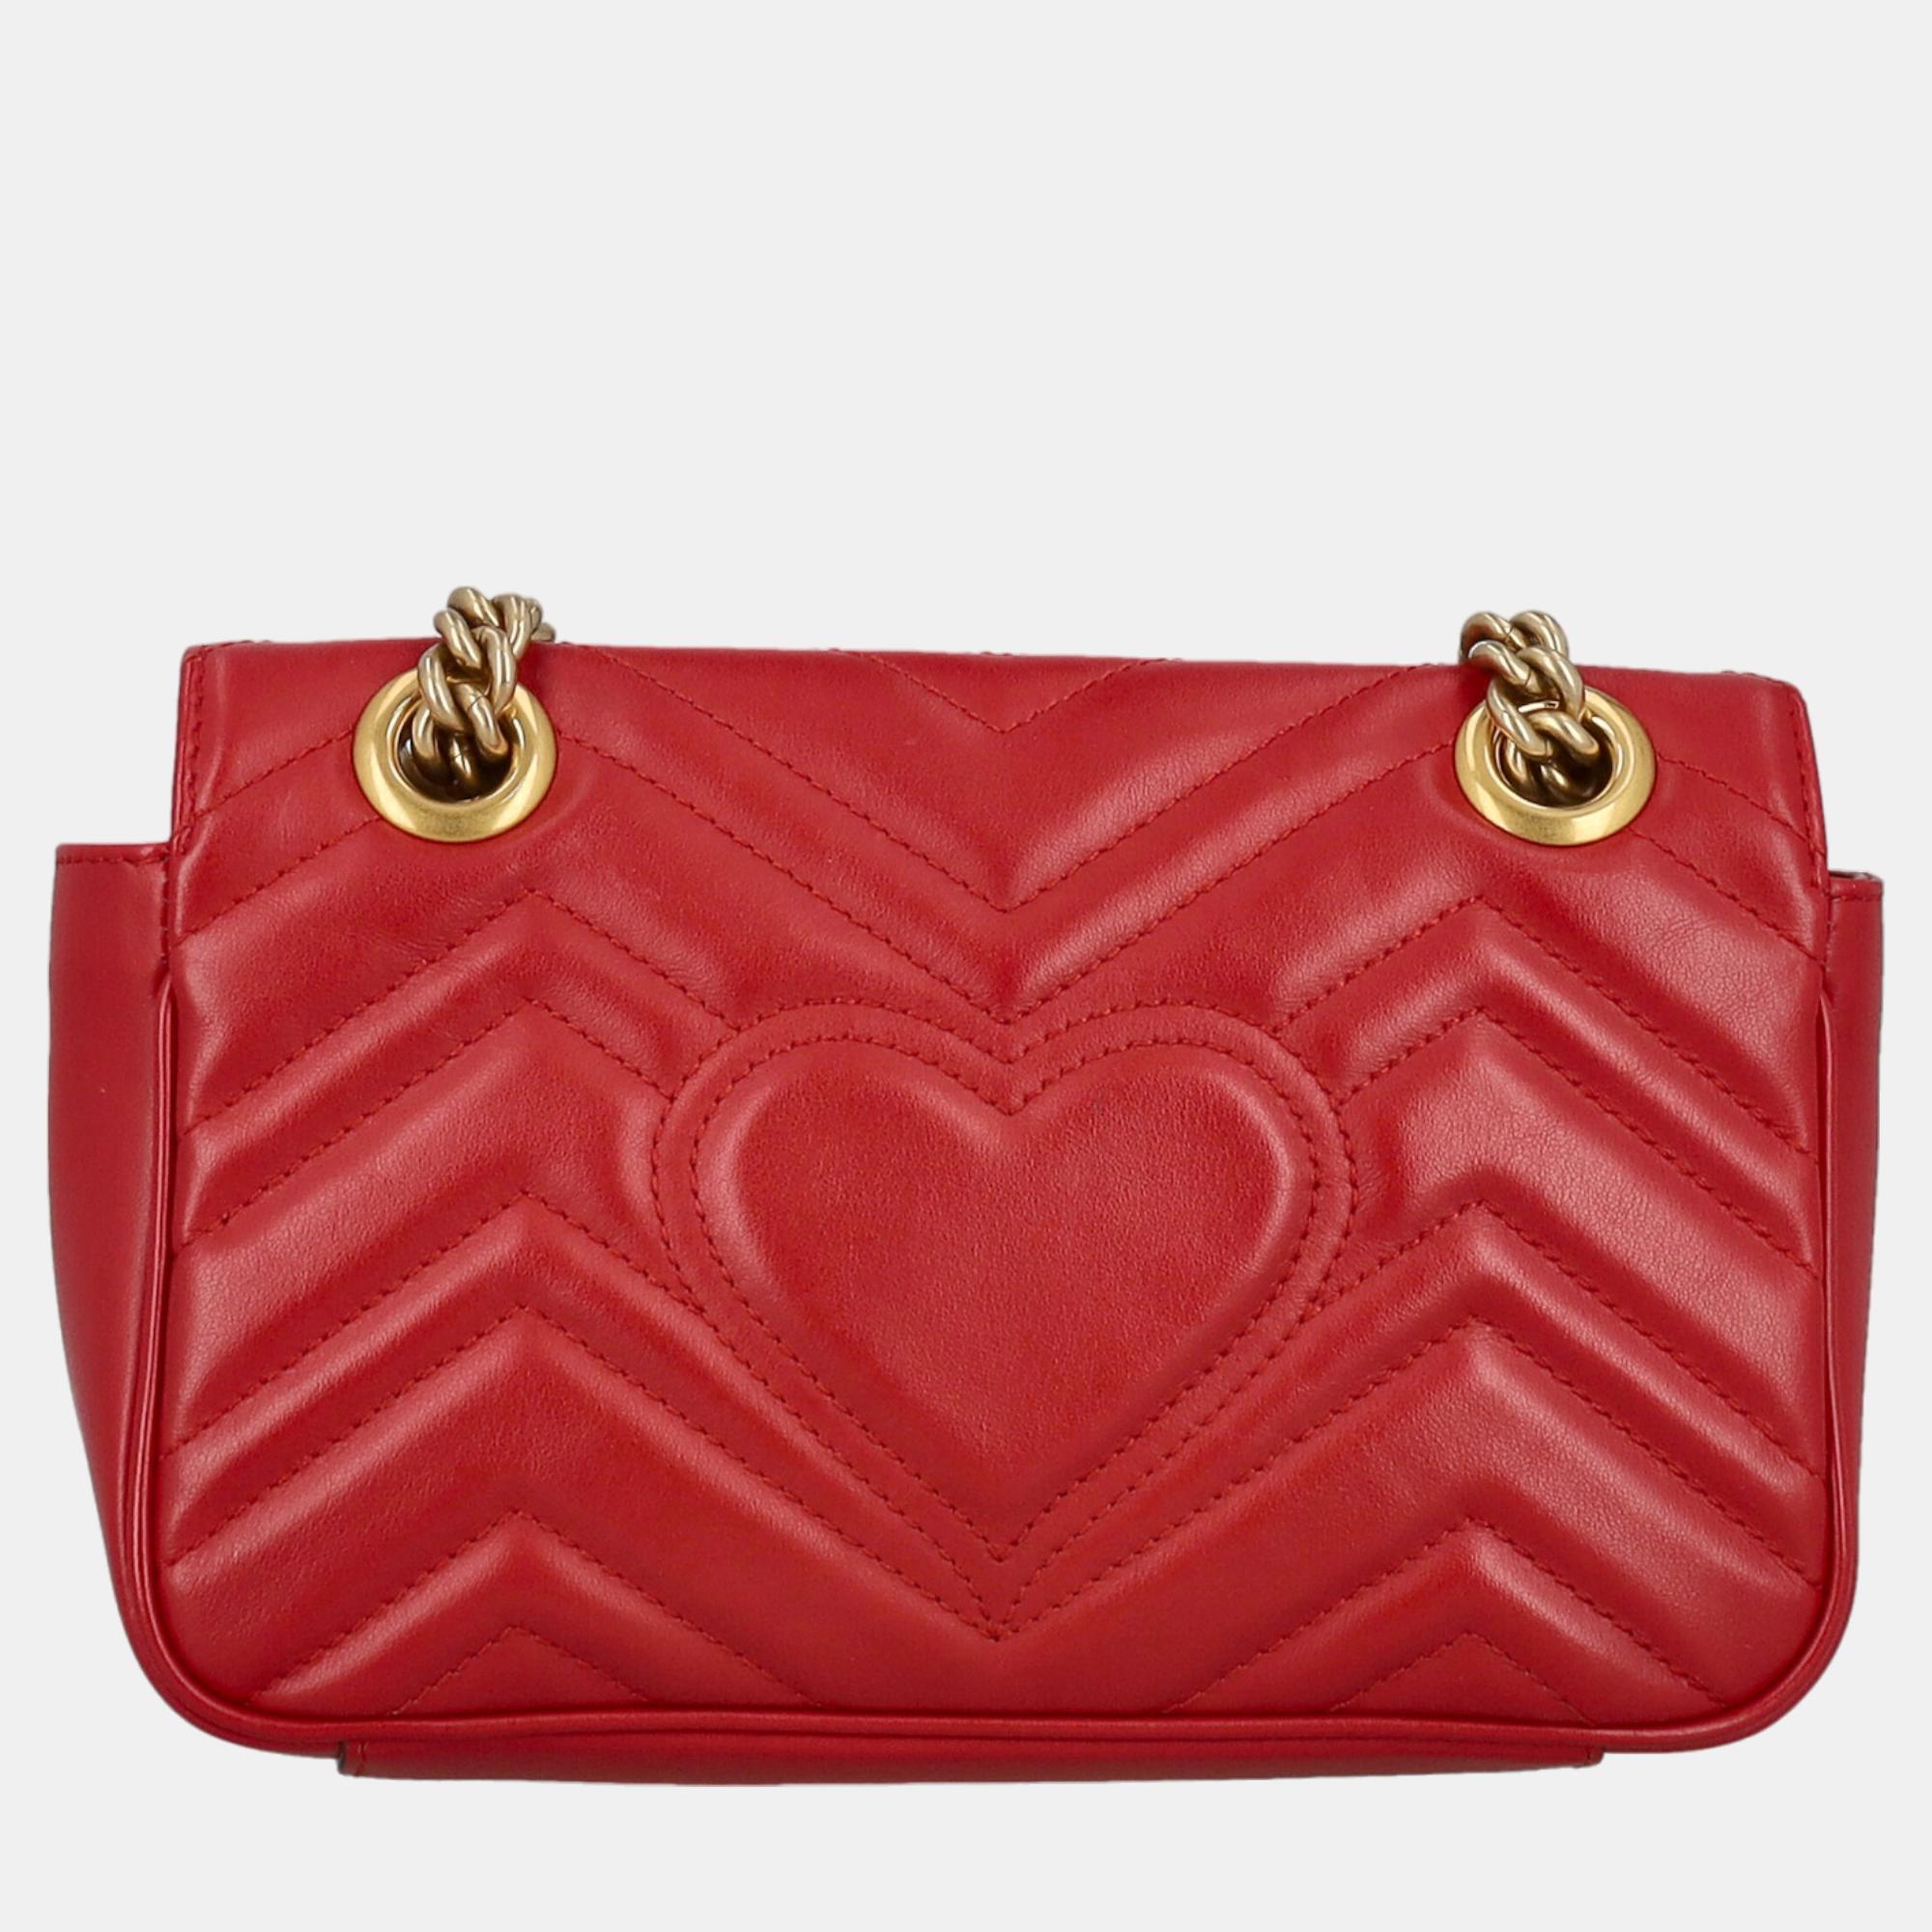 Gucci Marmont -  Women's Leather Cross Body Bag - Red - One Size